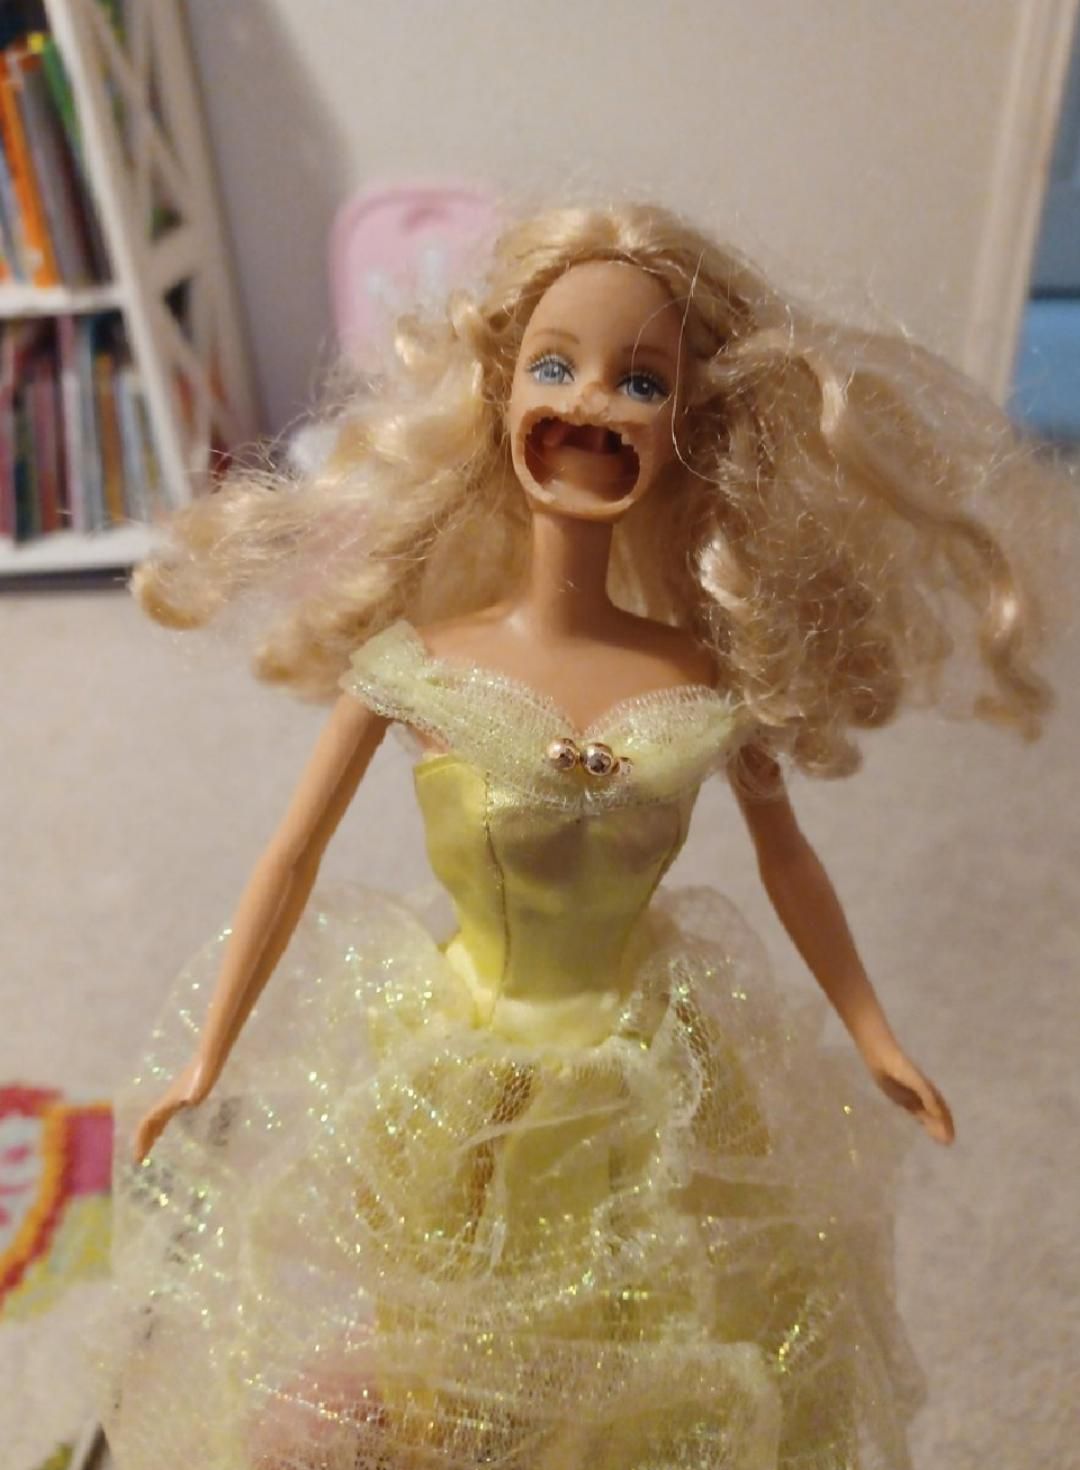 dog chewed on daughter's old Barbies and created....